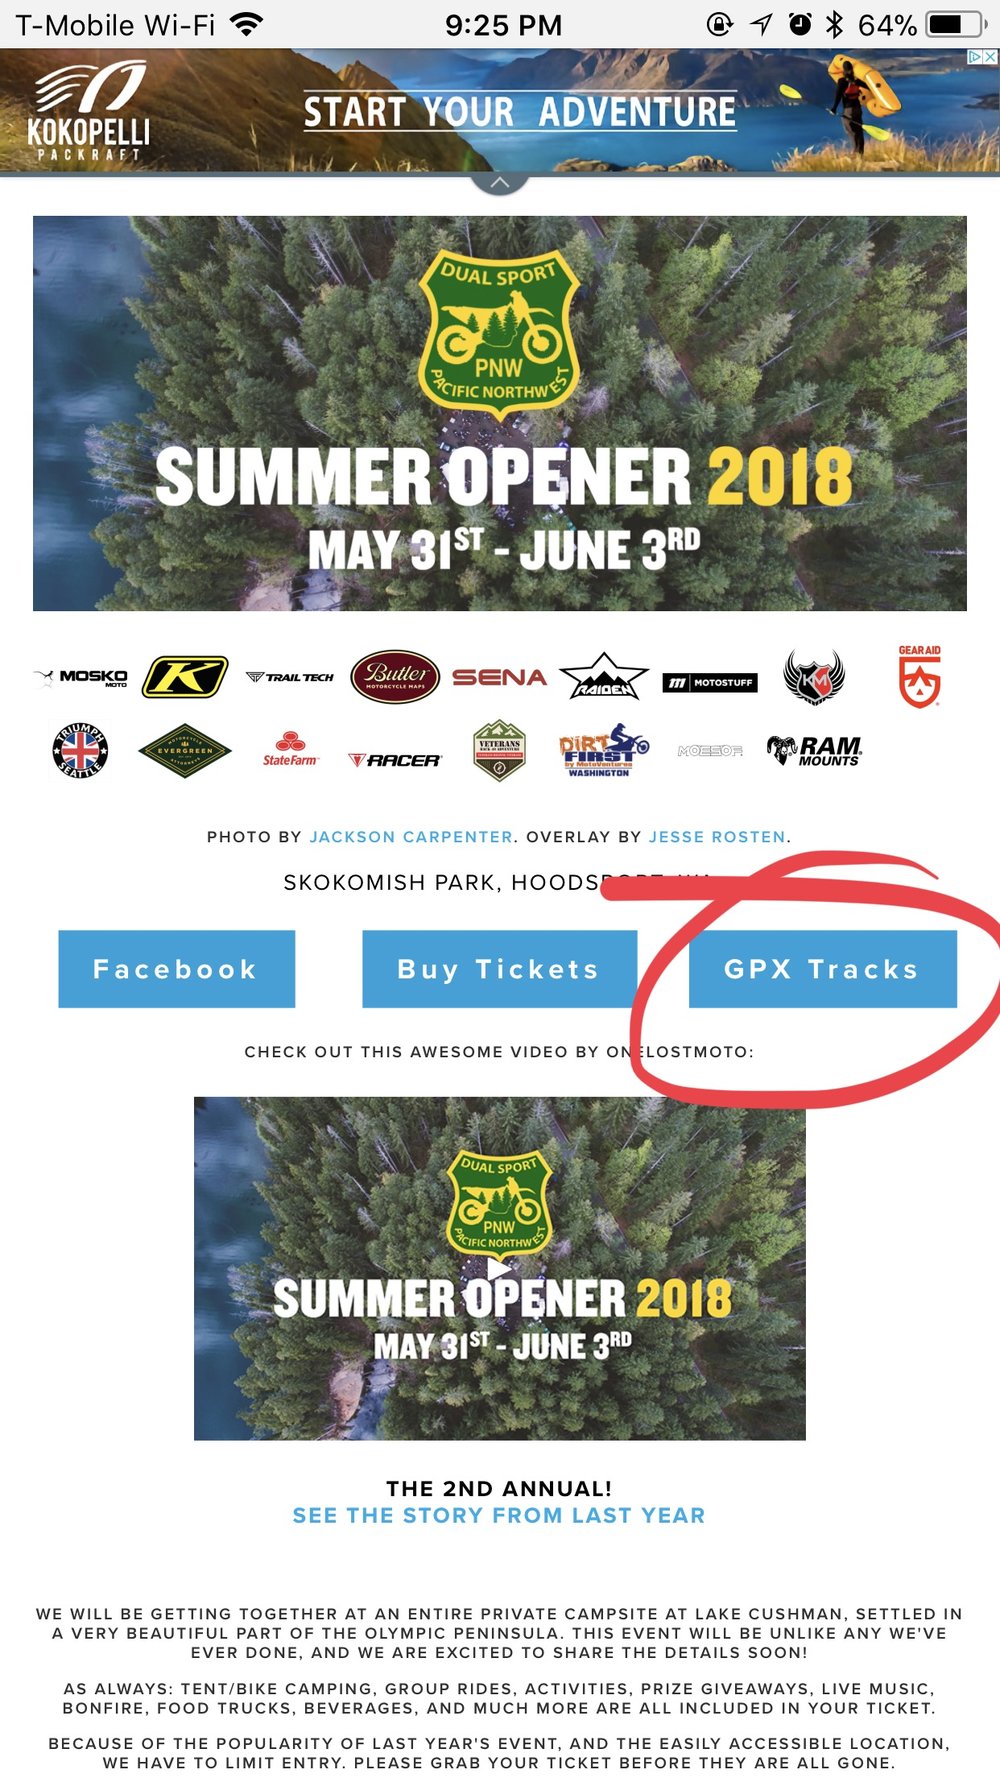  Find the GPX you want to download, like this one from our 2018 Summer Opener event. 